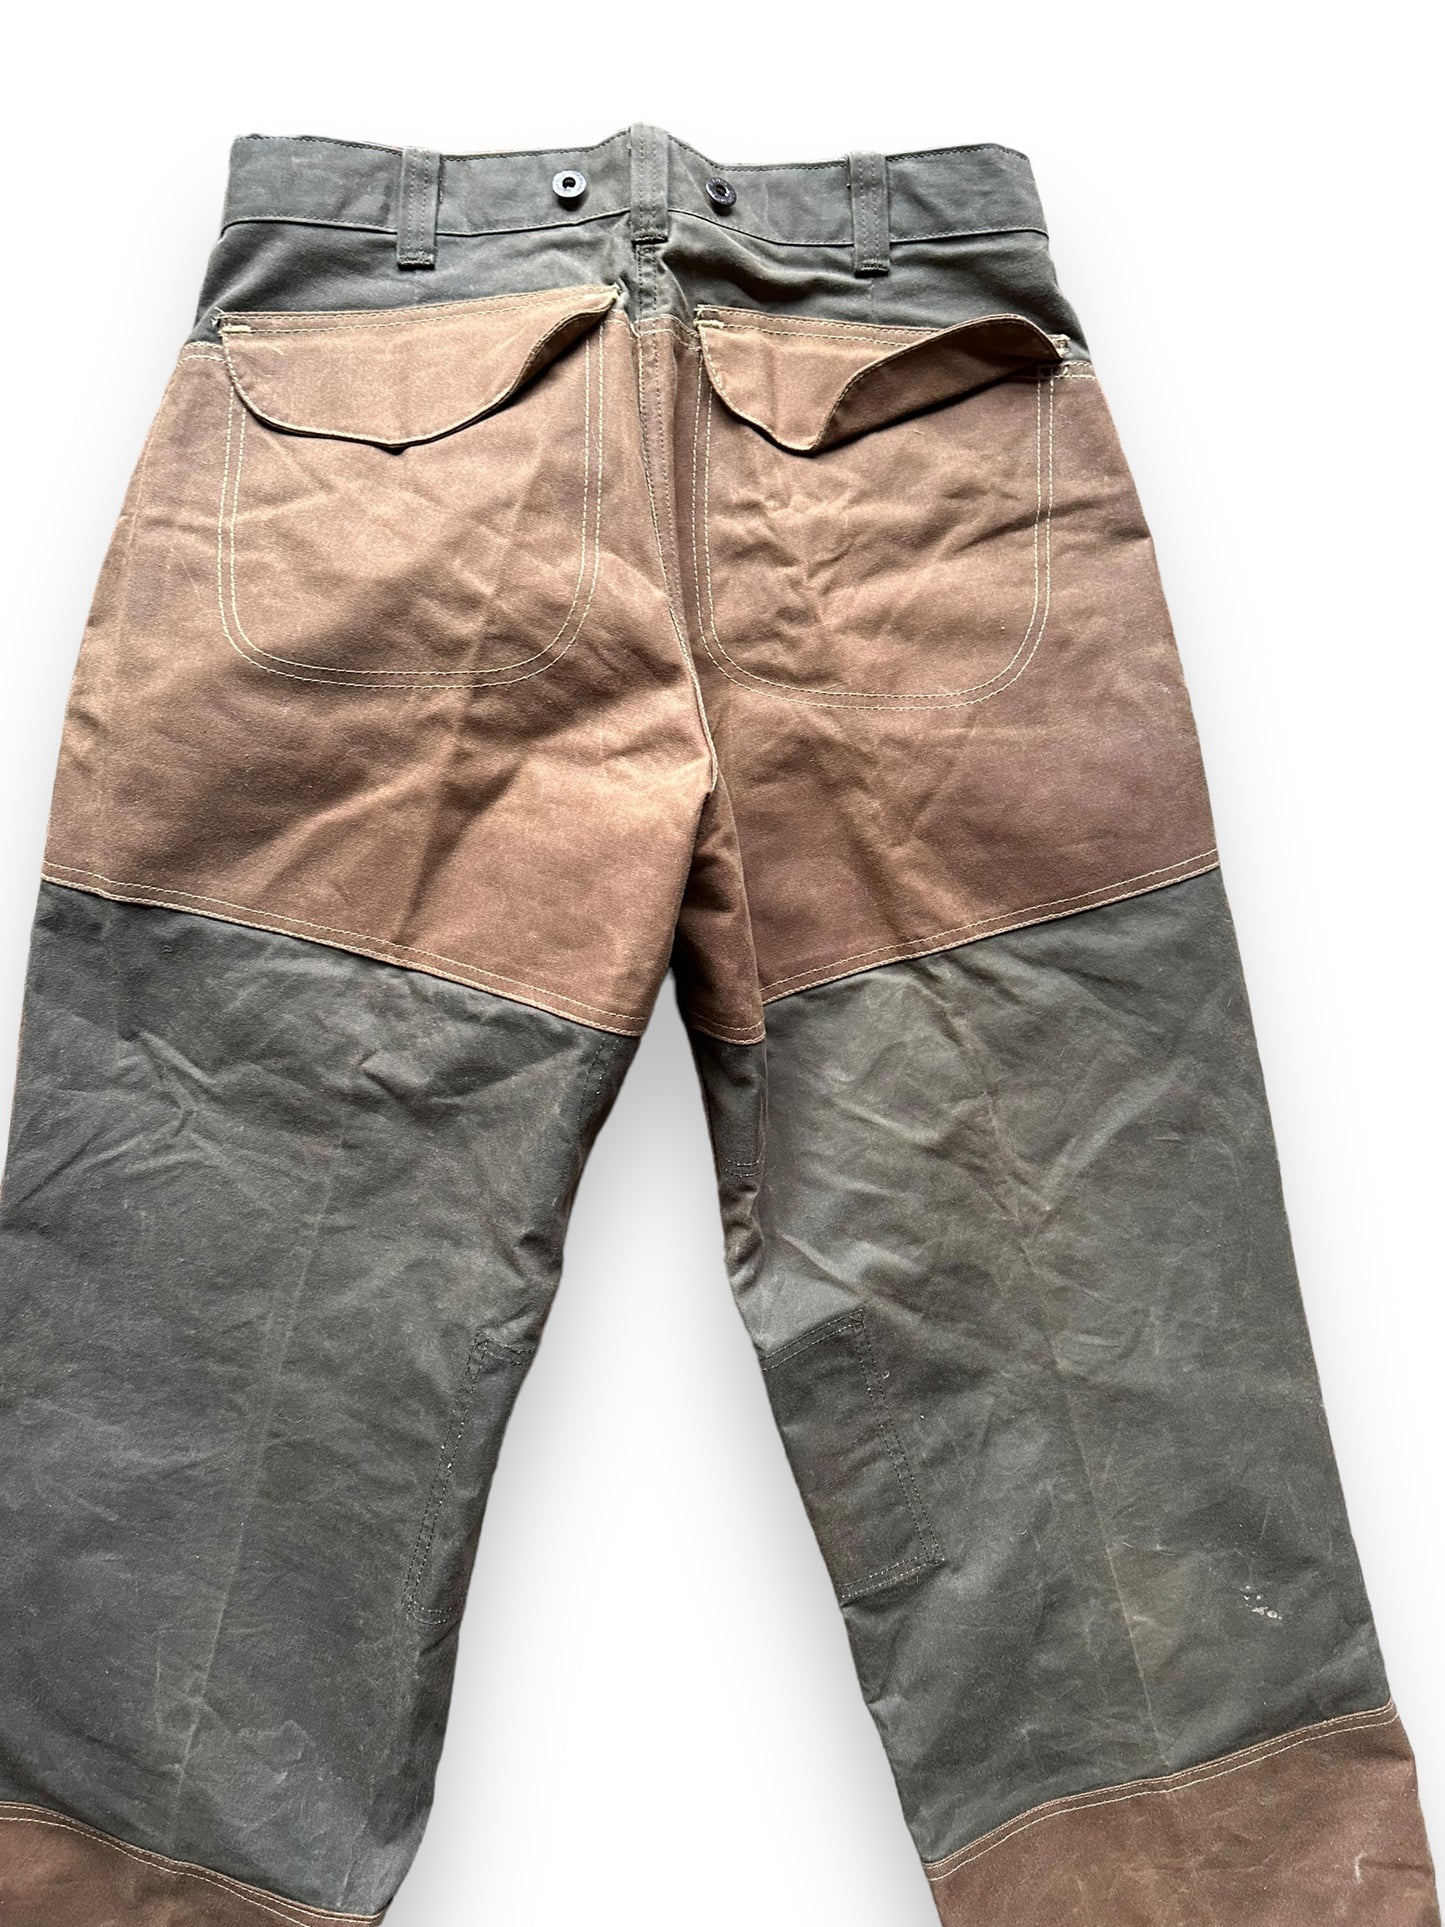 Upper Rear View of Vintage Filson Tin Cloth Double Hunting Pants W34 |  Barn Owl Vintage Goods | Filson Bargain Outlet Seattle